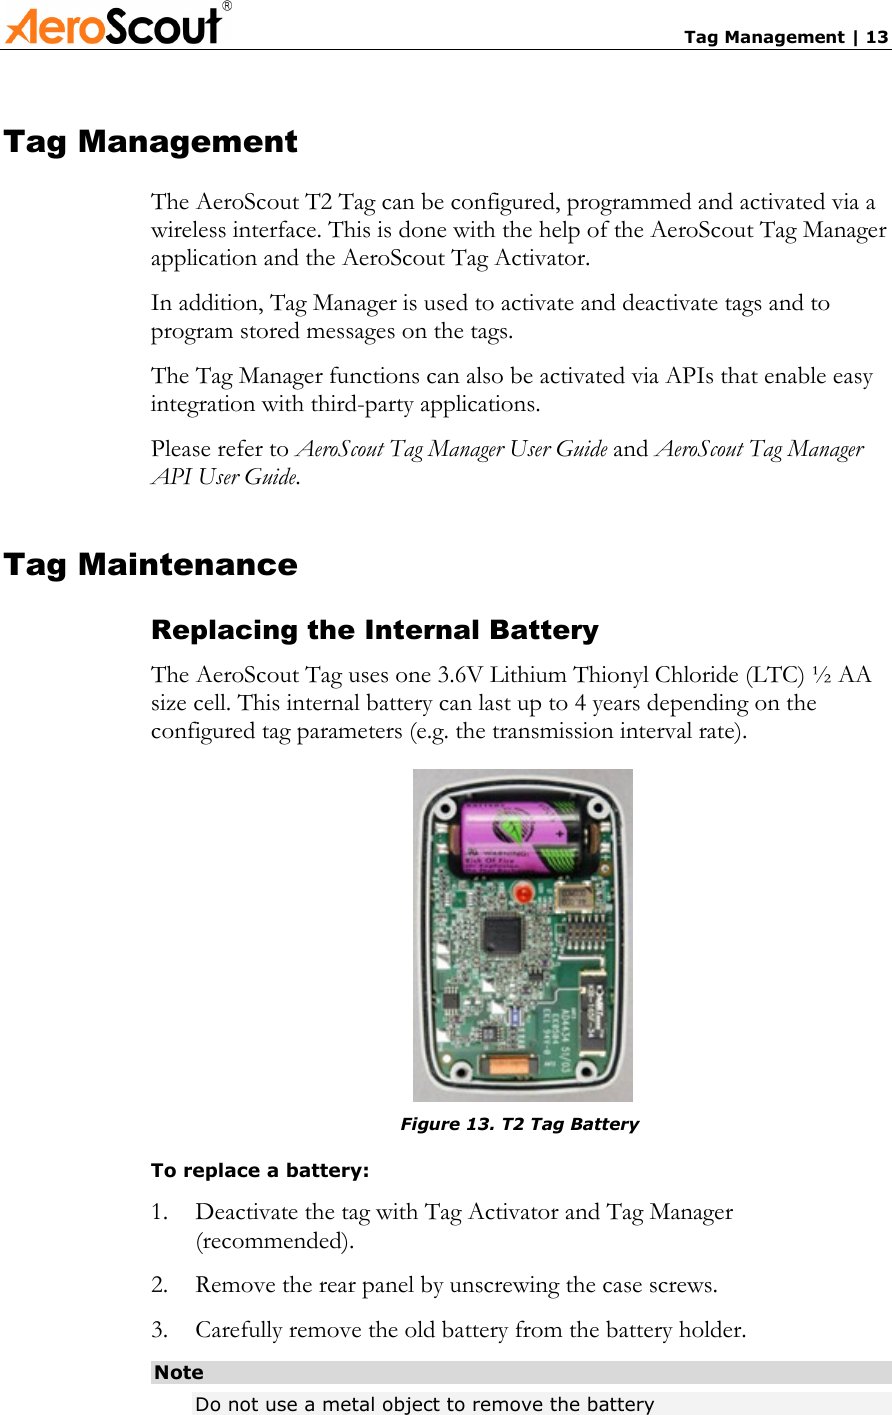       Tag Management | 13 Tag Management The AeroScout T2 Tag can be configured, programmed and activated via a wireless interface. This is done with the help of the AeroScout Tag Manager application and the AeroScout Tag Activator. In addition, Tag Manager is used to activate and deactivate tags and to program stored messages on the tags.  The Tag Manager functions can also be activated via APIs that enable easy integration with third-party applications. Please refer to AeroScout Tag Manager User Guide and AeroScout Tag Manager API User Guide.  Tag Maintenance Replacing the Internal Battery The AeroScout Tag uses one 3.6V Lithium Thionyl Chloride (LTC) ½ AA size cell. This internal battery can last up to 4 years depending on the configured tag parameters (e.g. the transmission interval rate).    Figure 13. T2 Tag Battery To replace a battery: 1.  Deactivate the tag with Tag Activator and Tag Manager (recommended). 2.  Remove the rear panel by unscrewing the case screws. 3.  Carefully remove the old battery from the battery holder. Note Do not use a metal object to remove the battery 